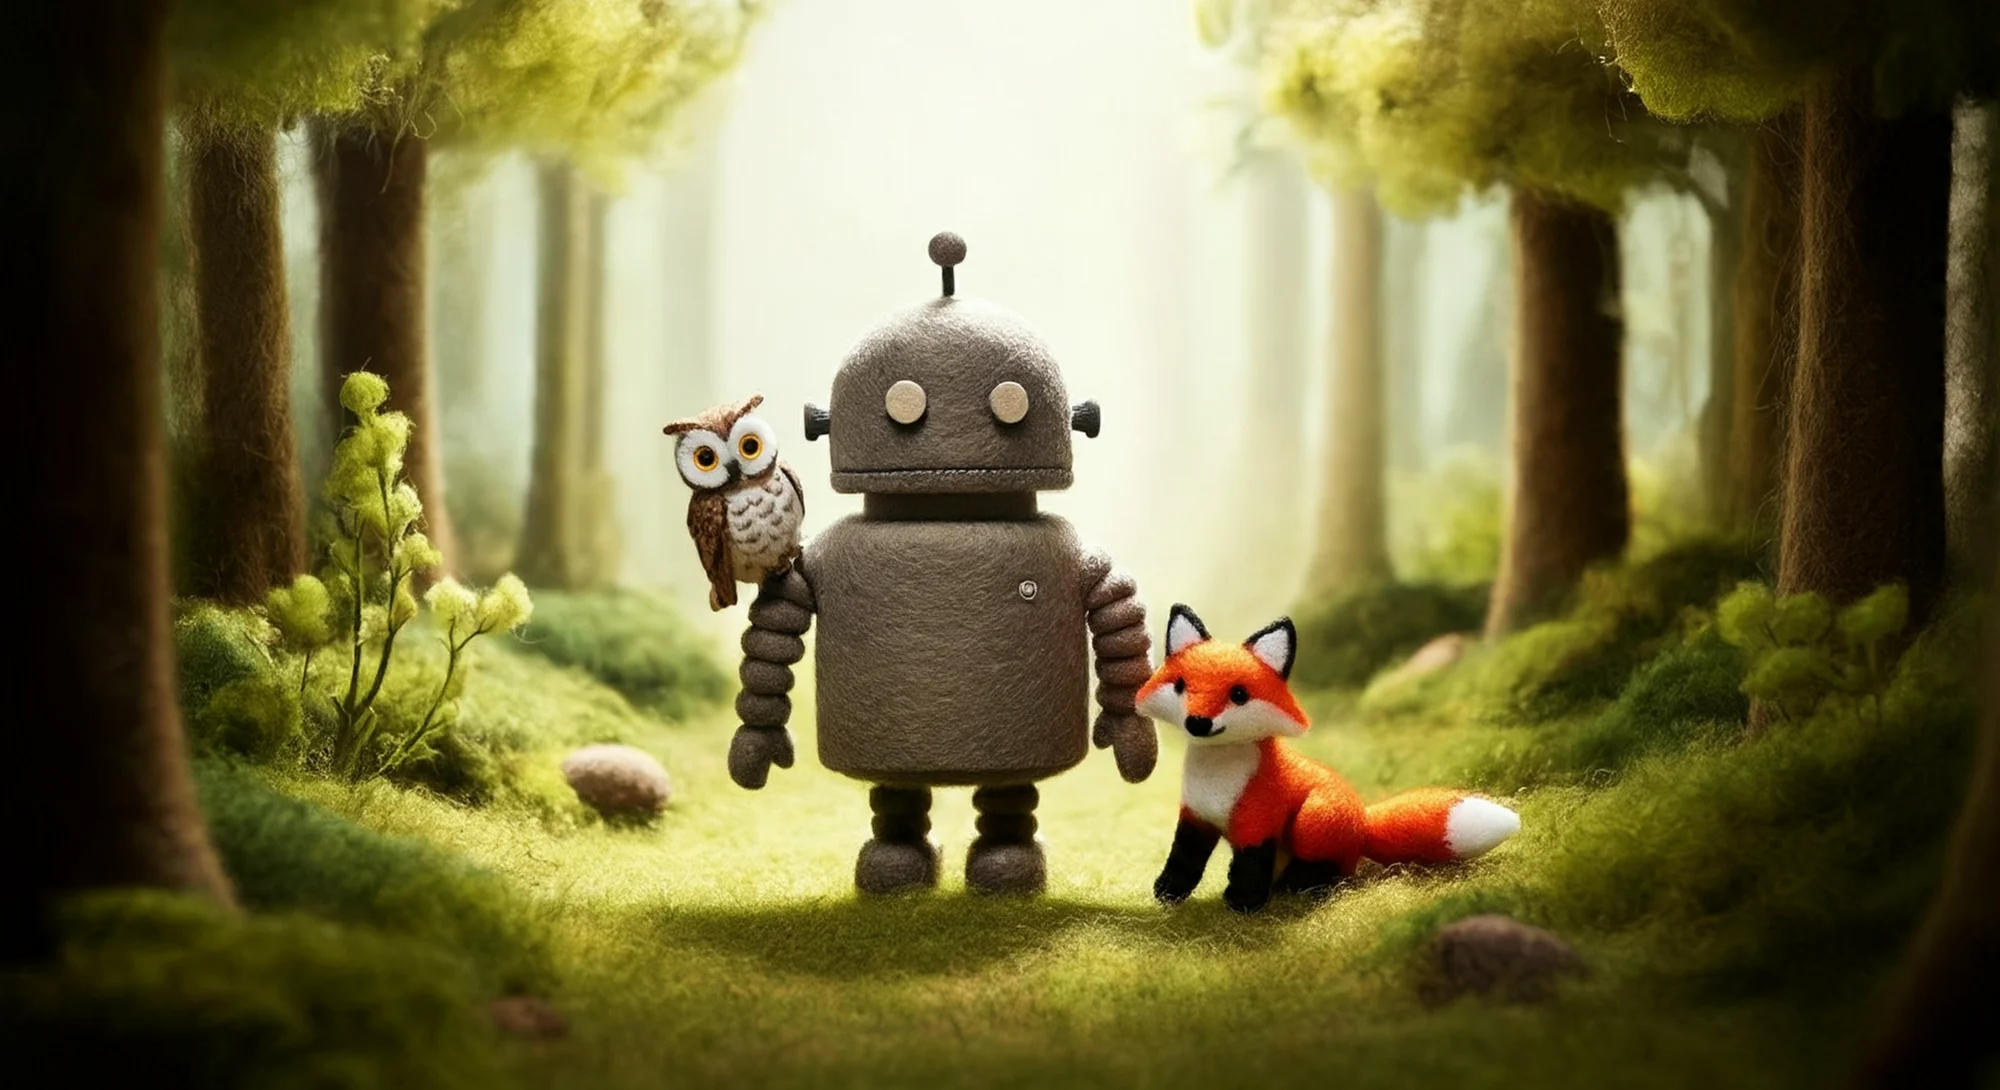 A felt robot stands in a sunlit forest clearing, with a felt owl perched on its shoulder and a felt fox sitting at its feet. The robot is grey, with large round eyes and a slightly worried expression. The owl has large, orange eyes and brown feathers. The fox has red fur and a bushy tail. The forest floor is covered in green moss and fallen leaves.